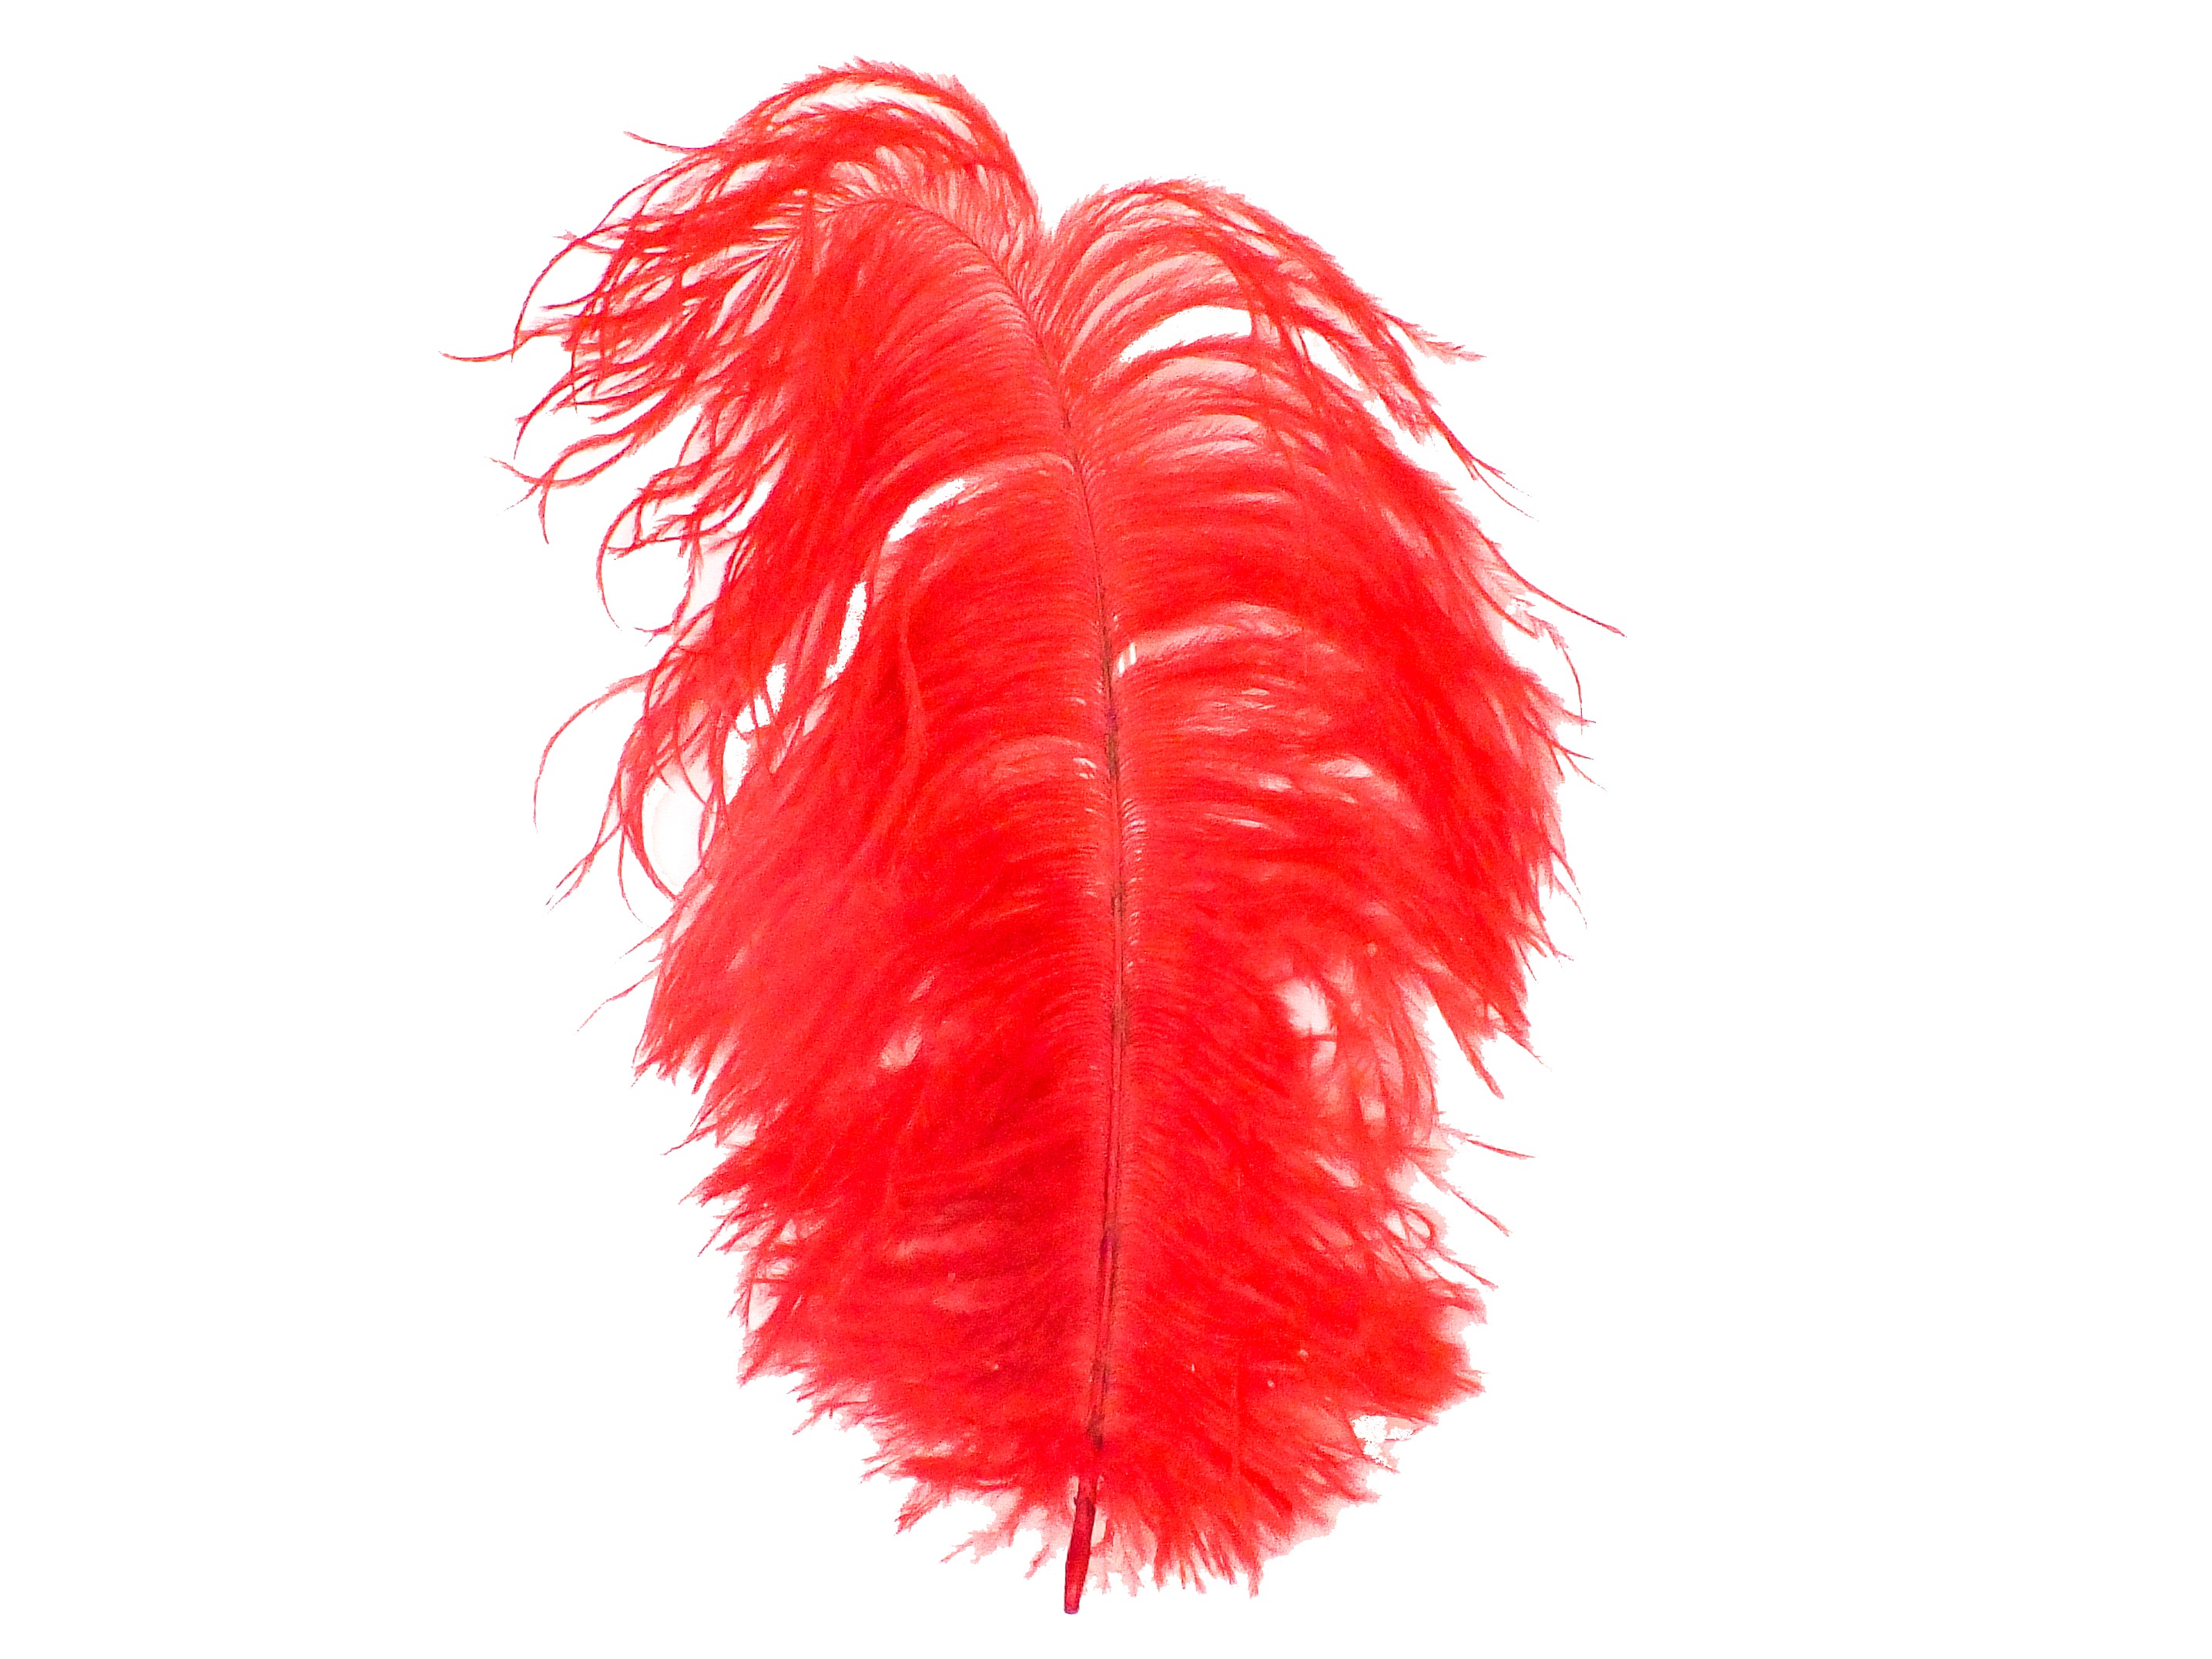 6 Red Feathers